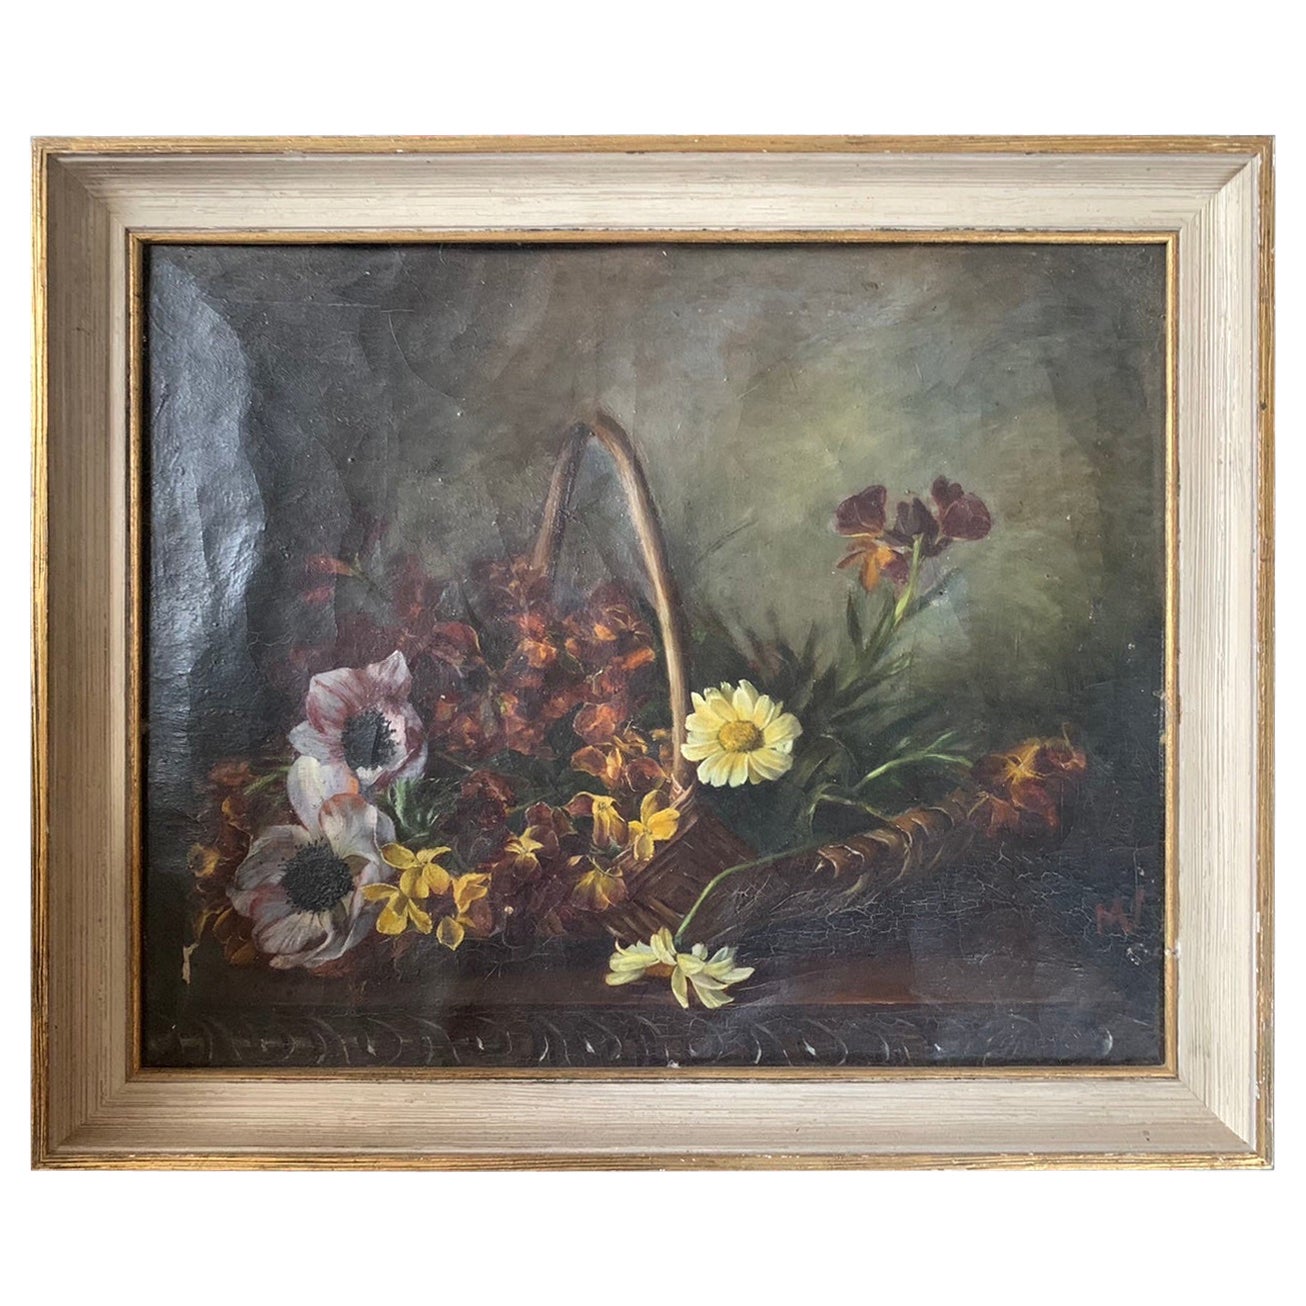 « Still Life with Flowers » Oil on Canvas Hand-Painted French School 19th